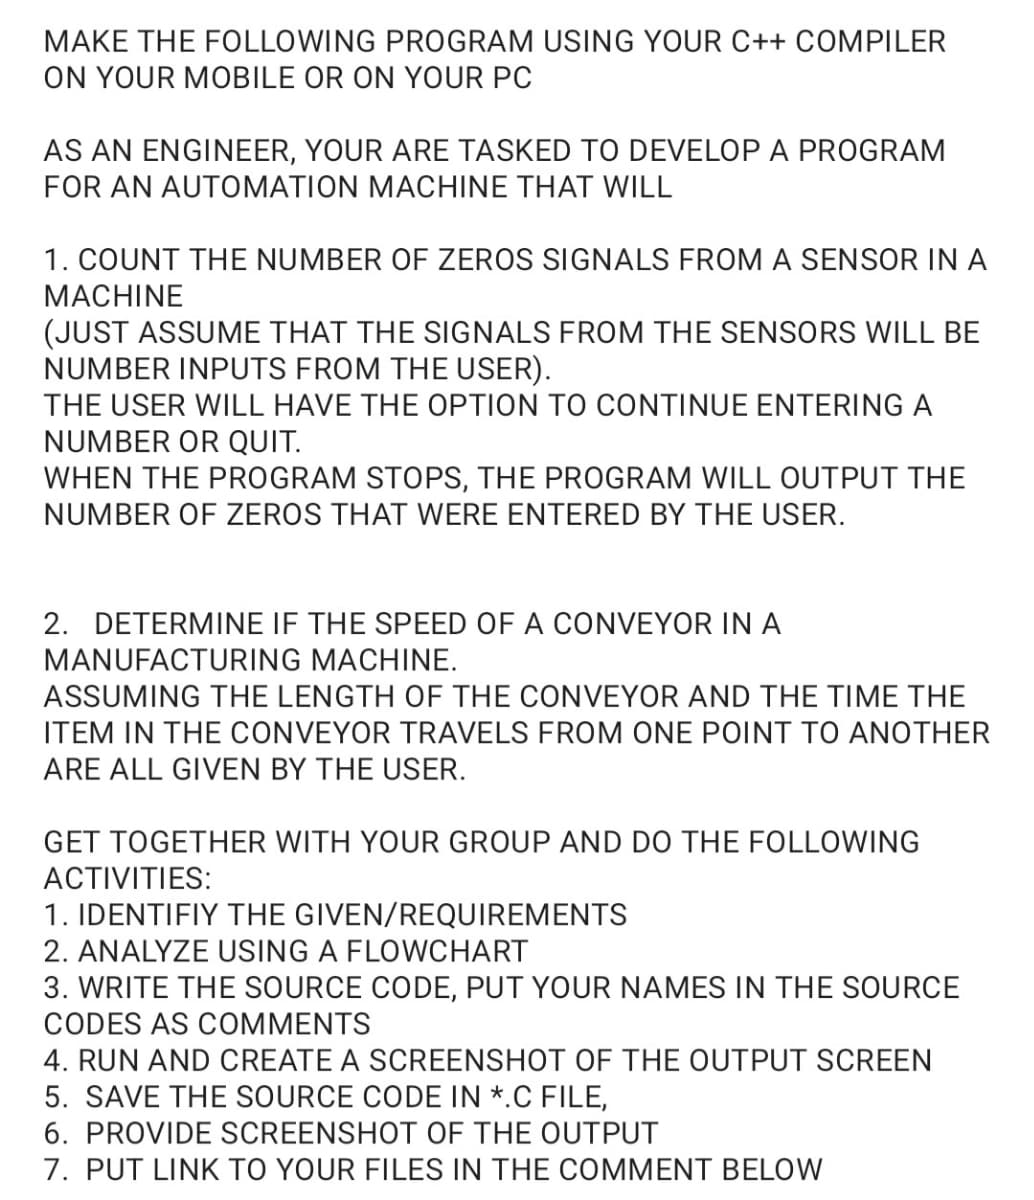 MAKE THE FOLLOWING PROGRAM USING YOUR C++ COMPILER
ON YOUR MOBILE OR ON YOUR PC
AS AN ENGINEER, YOUR ARE TASKED TO DEVELOP A PROGRAM
FOR AN AUTOMATION MACHINE THAT WILL
1. COUNT THE NUMBER OF ZEROS SIGNALS FROM A SENSOR IN A
MACHINE
(JUST ASSUME THAT THE SIGNALS FROM THE SENSORS WILL BE
NUMBER INPUTS FROM THE USER).
THE USER WILL HAVE THE OPTION TO CONTINUE ENTERING A
NUMBER OR QUIT.
WHEN THE PROGRAM STOPS, THE PROGRAM WILL OUTPUT THE
NUMBER OF ZEROS THAT WERE ENTERED BY THE USER.
2. DETERMINE IF THE SPEED OF A CONVEYOR IN A
MANUFACTURING MACHINE.
ASSUMING THE LENGTH OF THE CONVEYOR AND THE TIME THE
ITEM IN THE CONVEYOR TRAVELS FROM ONE POINT TO ANOTHER
ARE ALL GIVEN BY THE USER.
GET TOGETHER WITH YOUR GROUP AND DO THE FOLLOWING
ACTIVITIES:
1. IDENTIFIY THE GIVEN/REQUIREMENTS
2. ANALYZE USING A FLOWCHART
3. WRITE THE SOURCE CODE, PUT YOUR NAMES IN THE SOURCE
CODES AS COMMENTS
4. RUN AND CREATE A SCREENSHOT OF THE OUTPUT SCREEN
5. SAVE THE SOURCE CODE IN *.C FILE,
6. PROVIDE SCREENSHOT OF THE OUTPUT
7. PUT LINK TO YOUR FILES IN THE COMMENT BELOW
